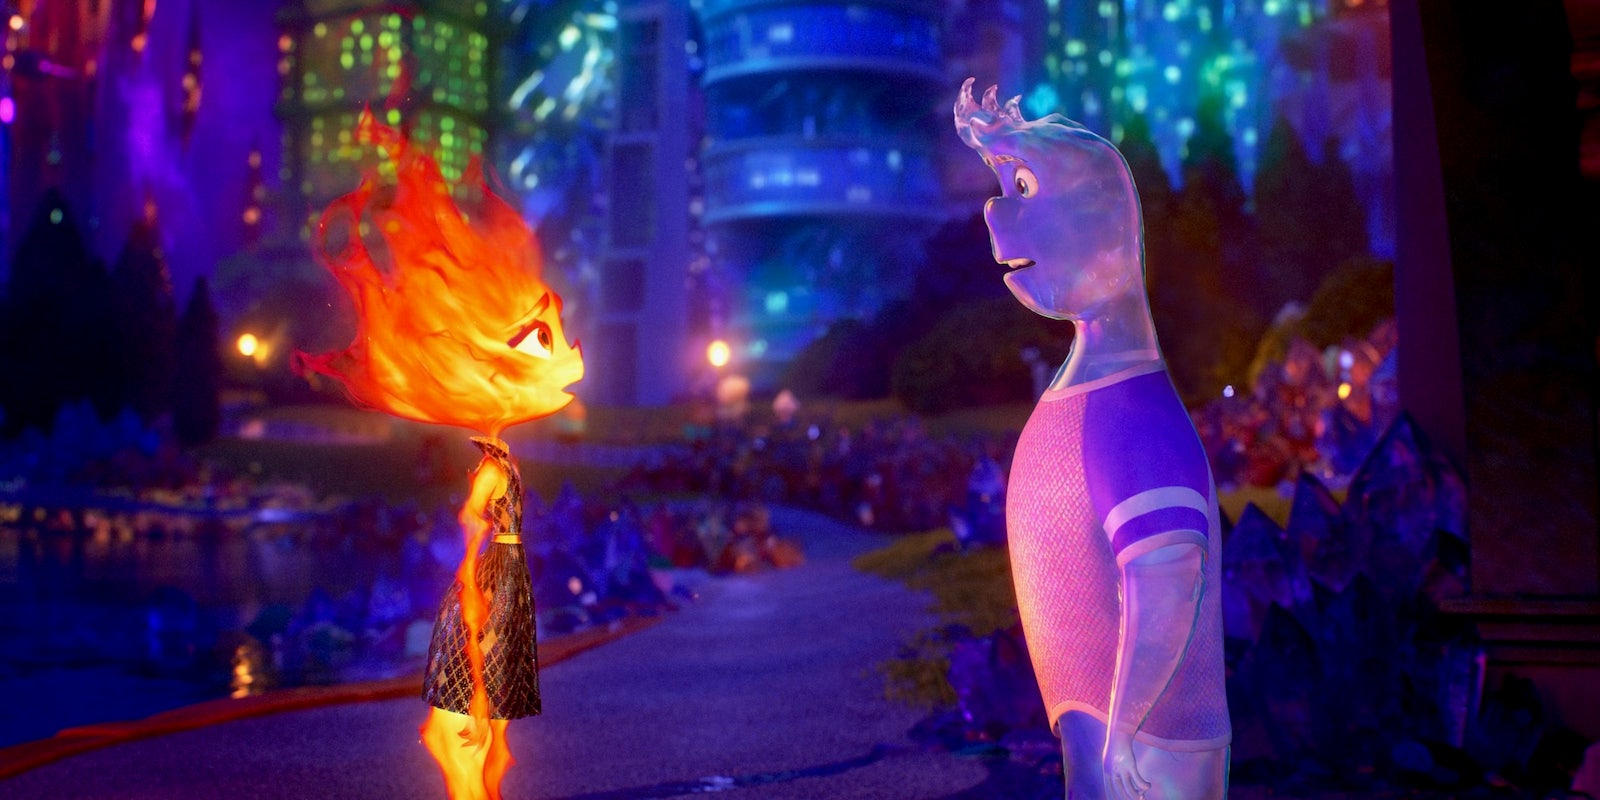 ember (left) and wade (right) in elemental